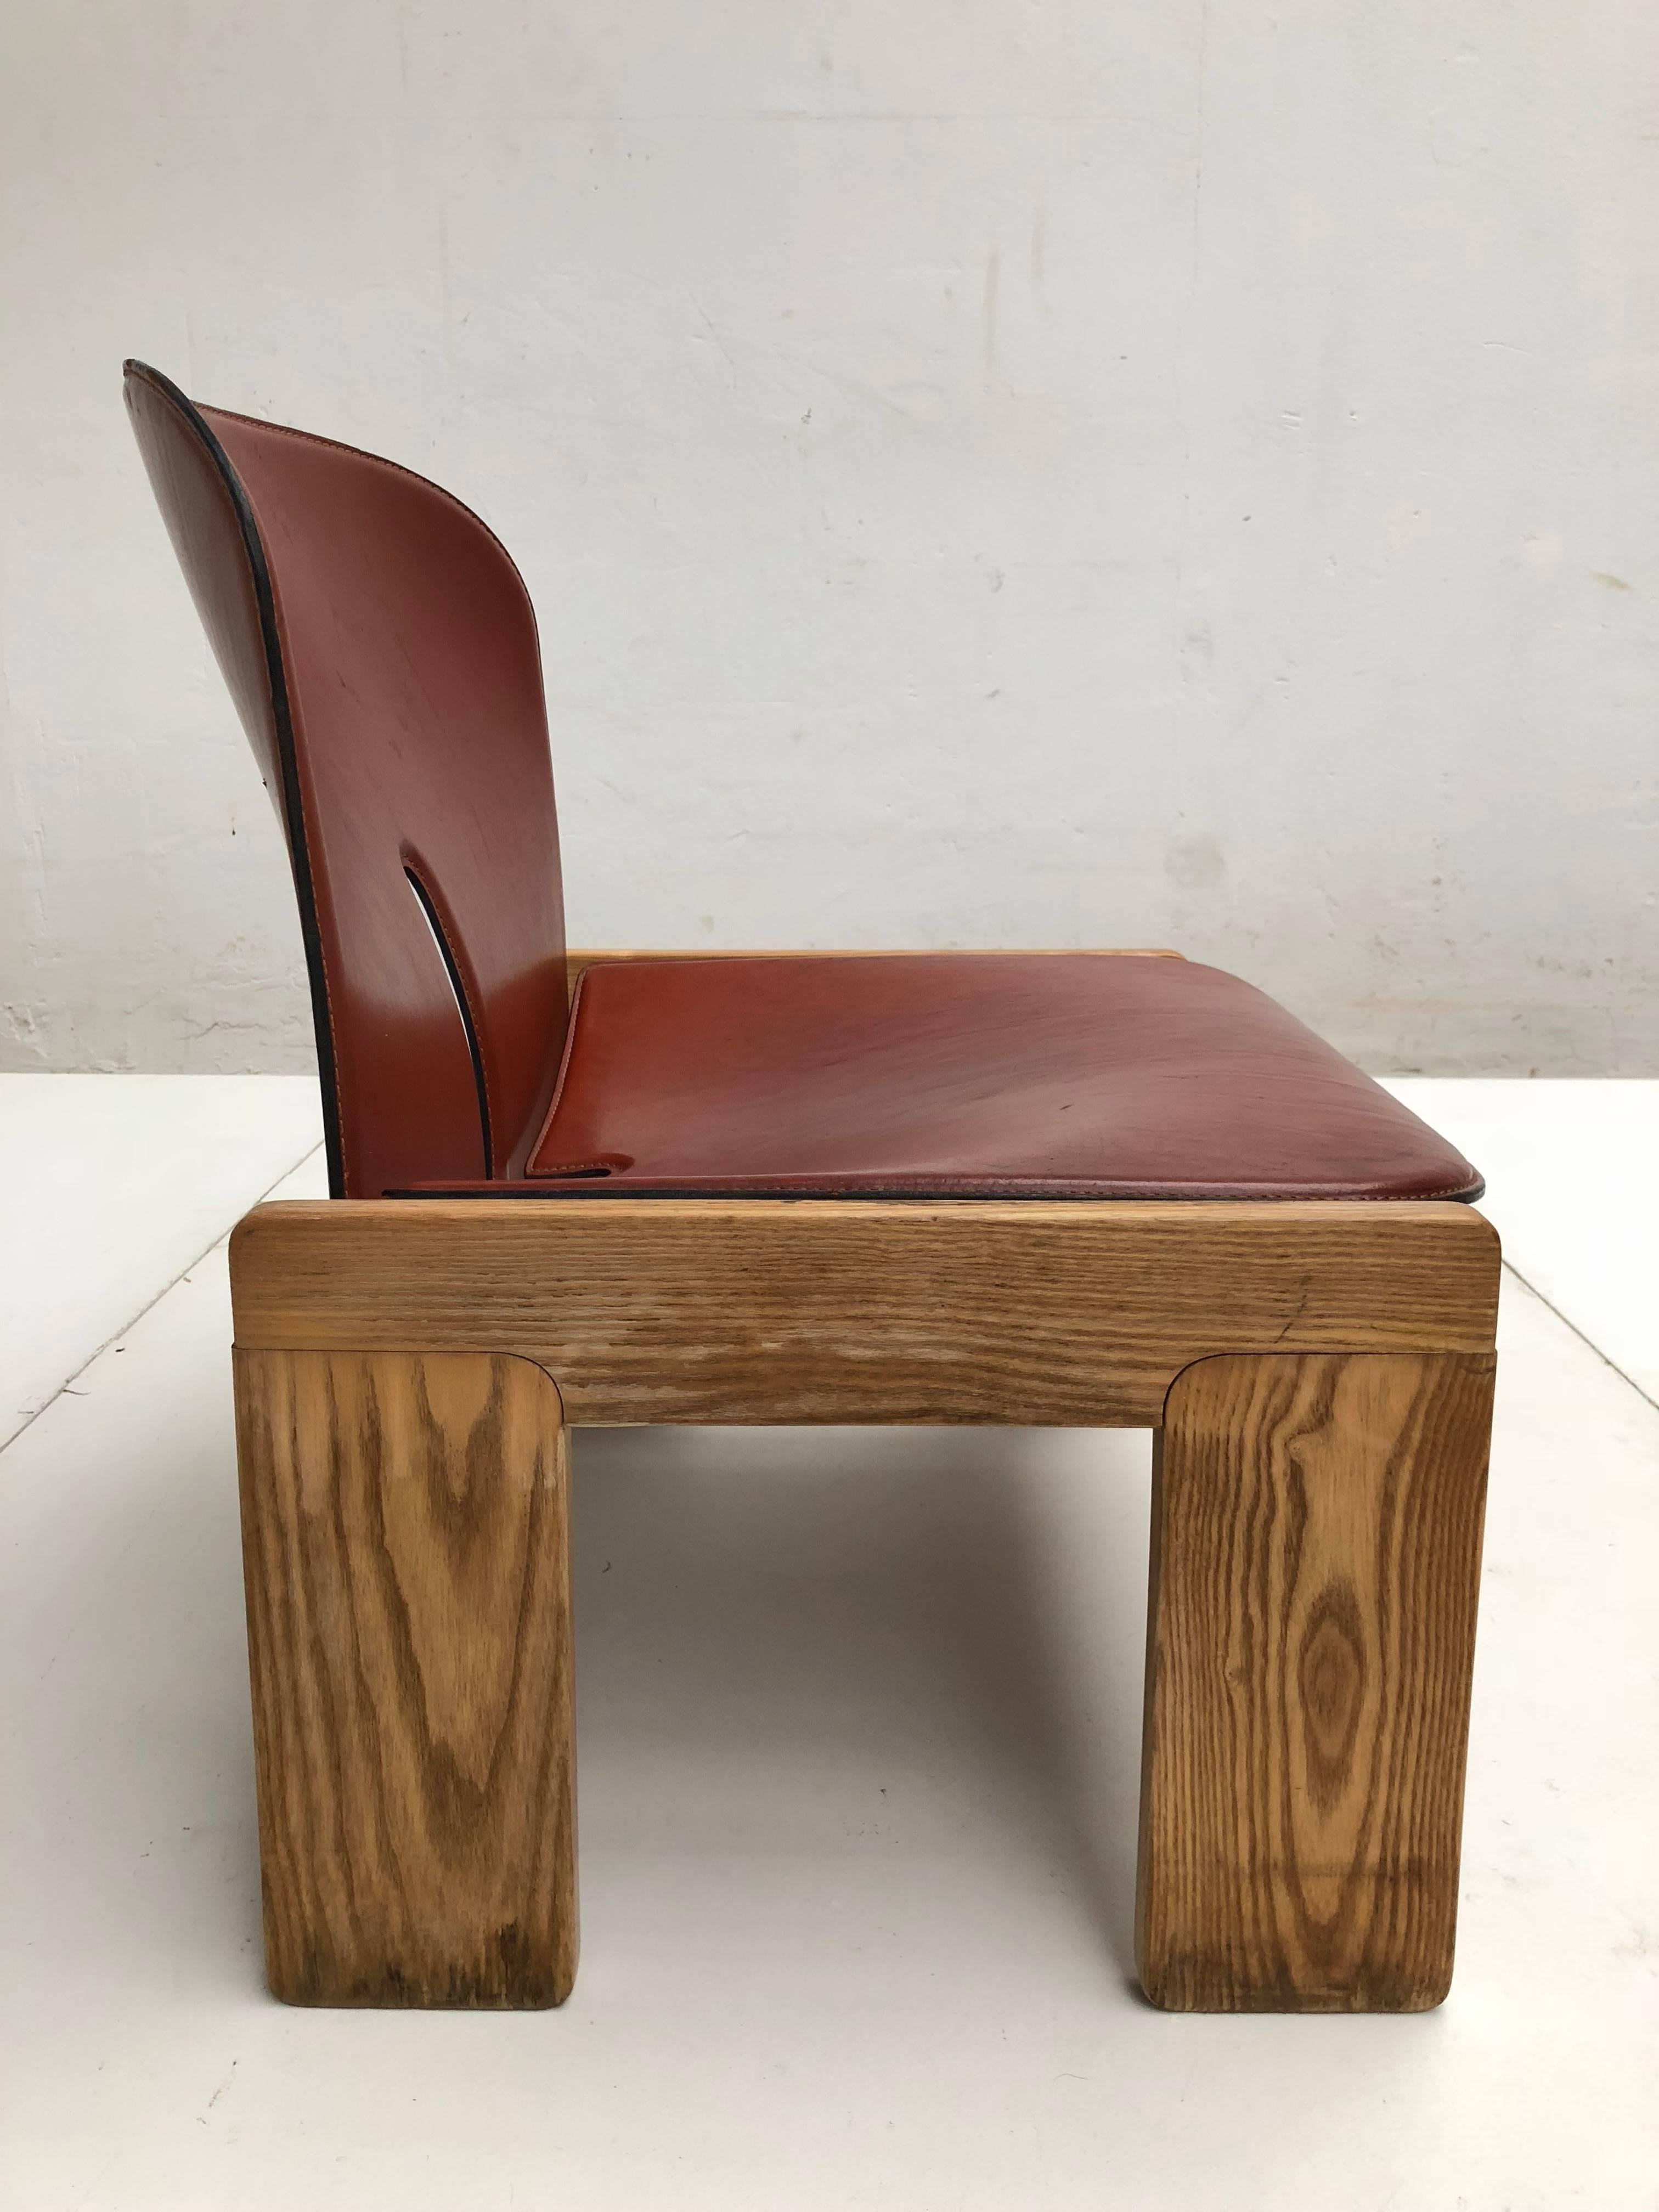 Italian Vintage Leather and Ash Wood 925 Chair by Afra and Tobia Scarpa for Cassina 1966